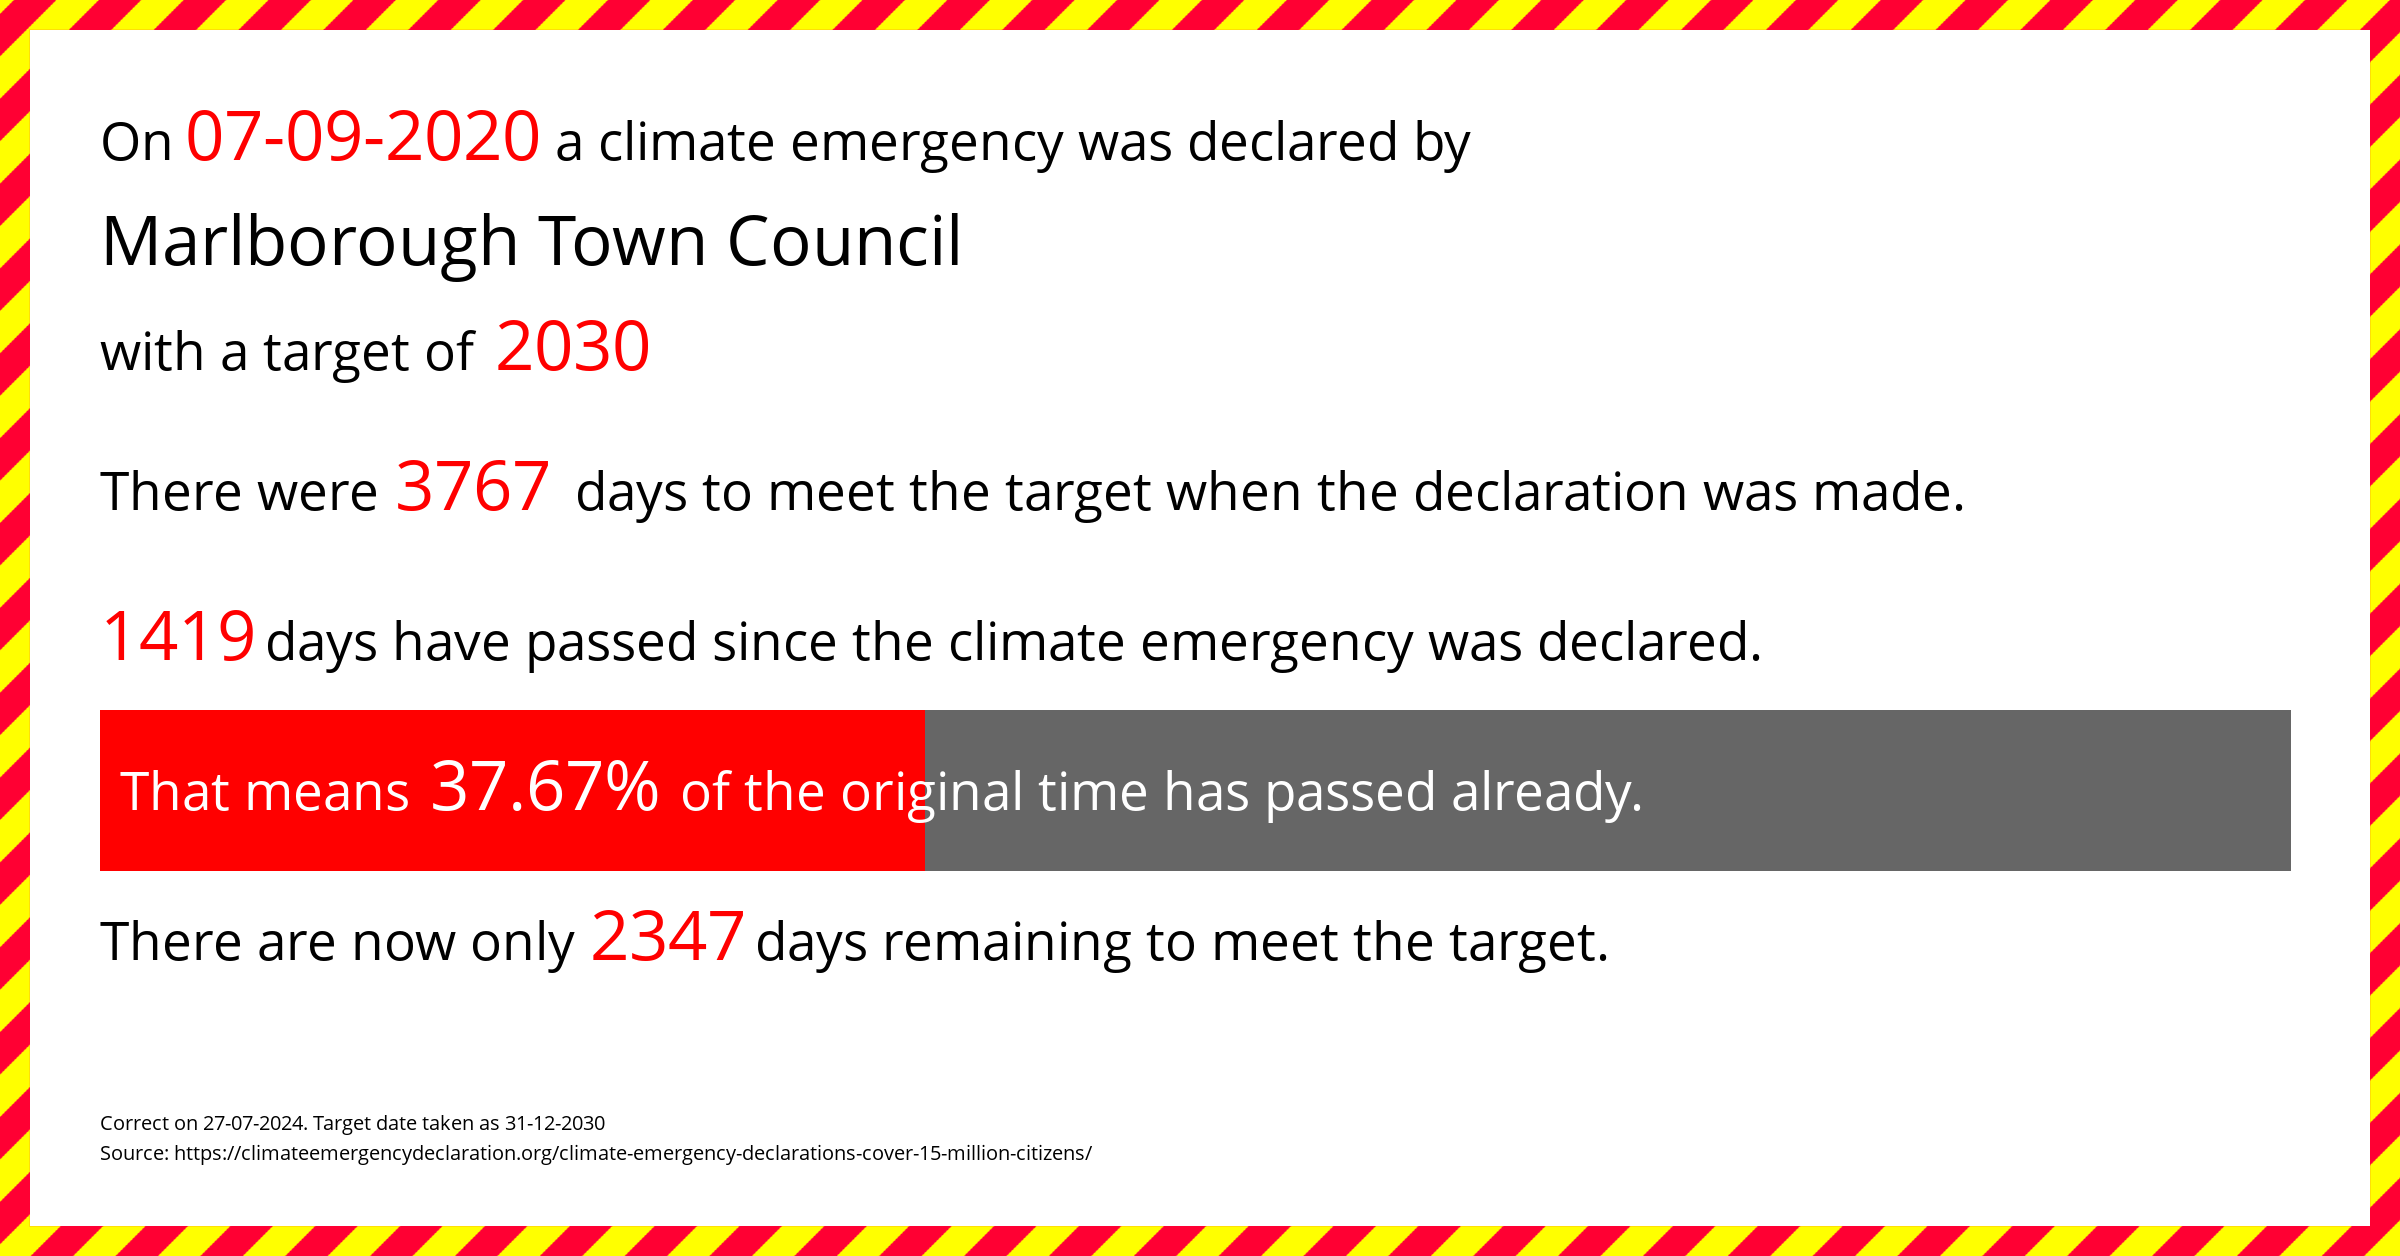 Marlborough Town Council  declared a Climate emergency on Monday 7th September 2020, with a target of 2030.